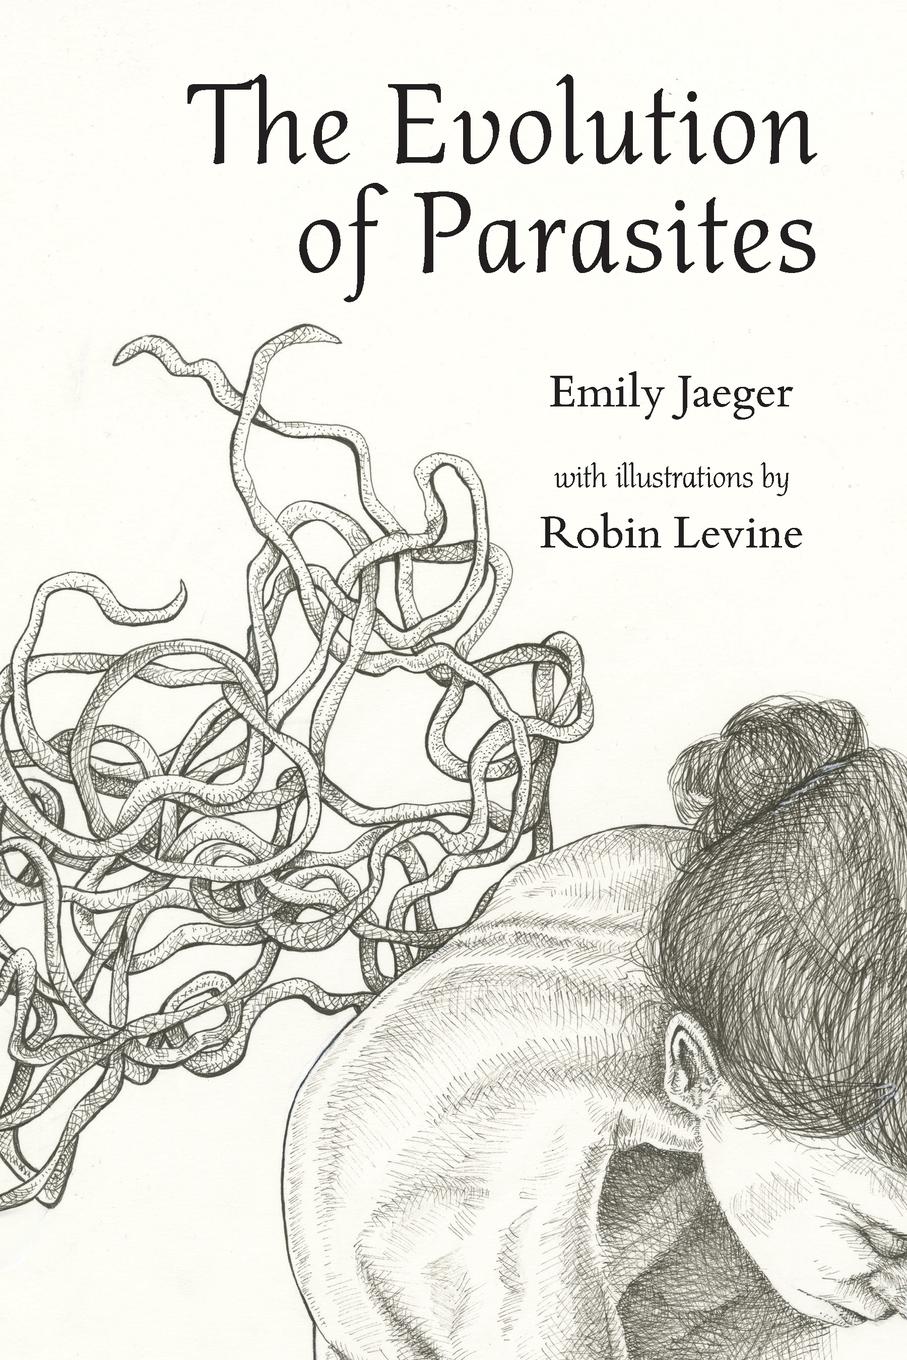 Image of The Evolution of Parasites by Emily Jaeger with Illustrations by Robin Levine